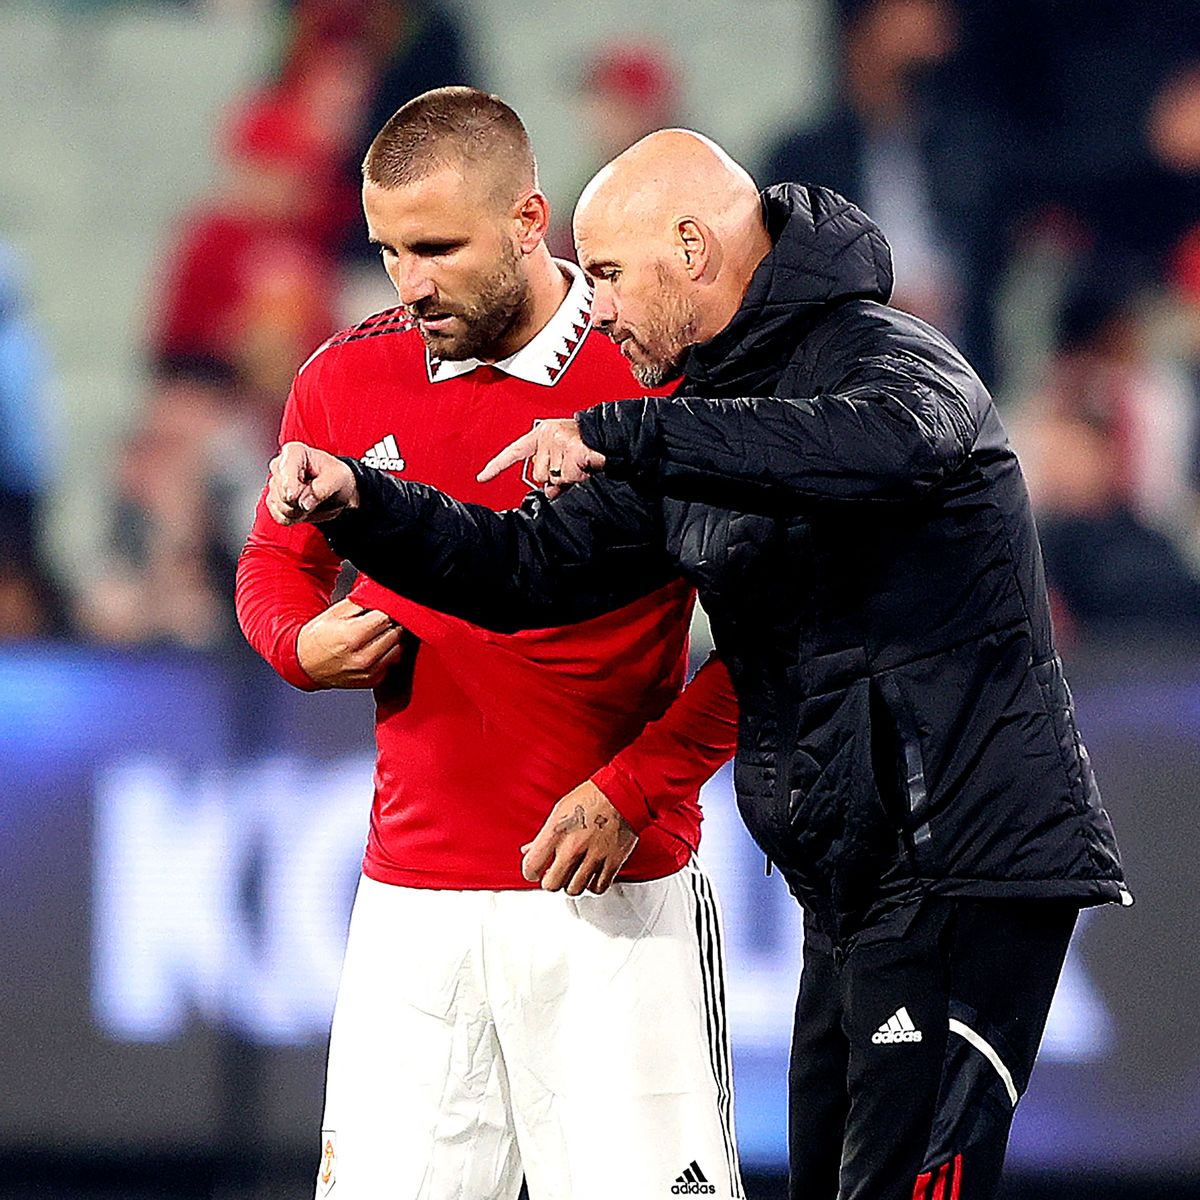 Man United left-back Luke Shaw says he is 'ready to play' when given the opportunity by boss Erik ten Hag